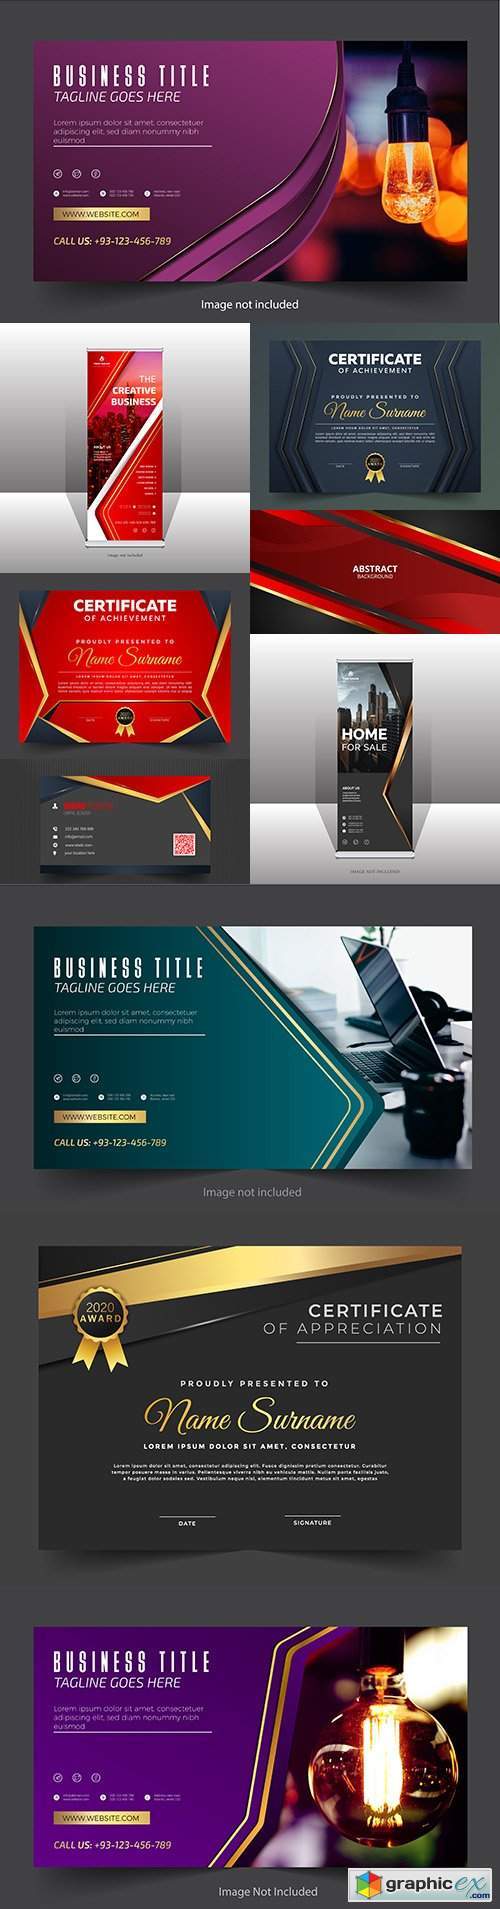 Professional and elegant business banner with certification and background